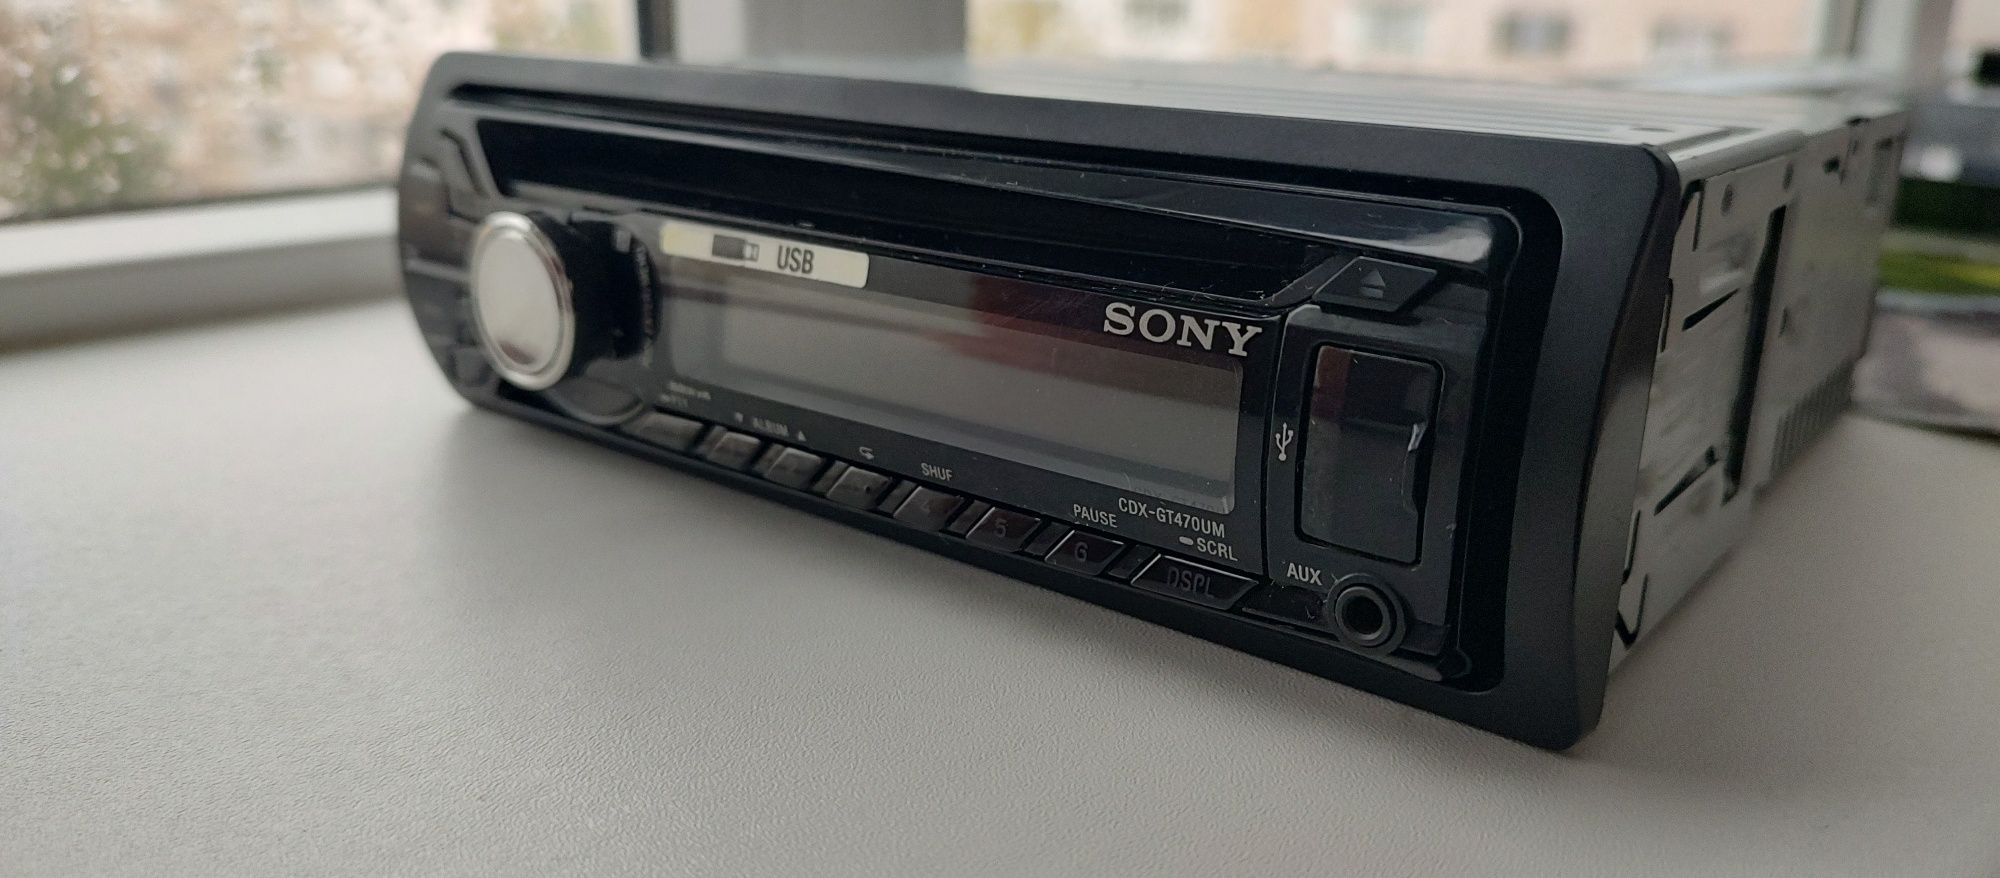 Cd player Sony, pionner usb aux